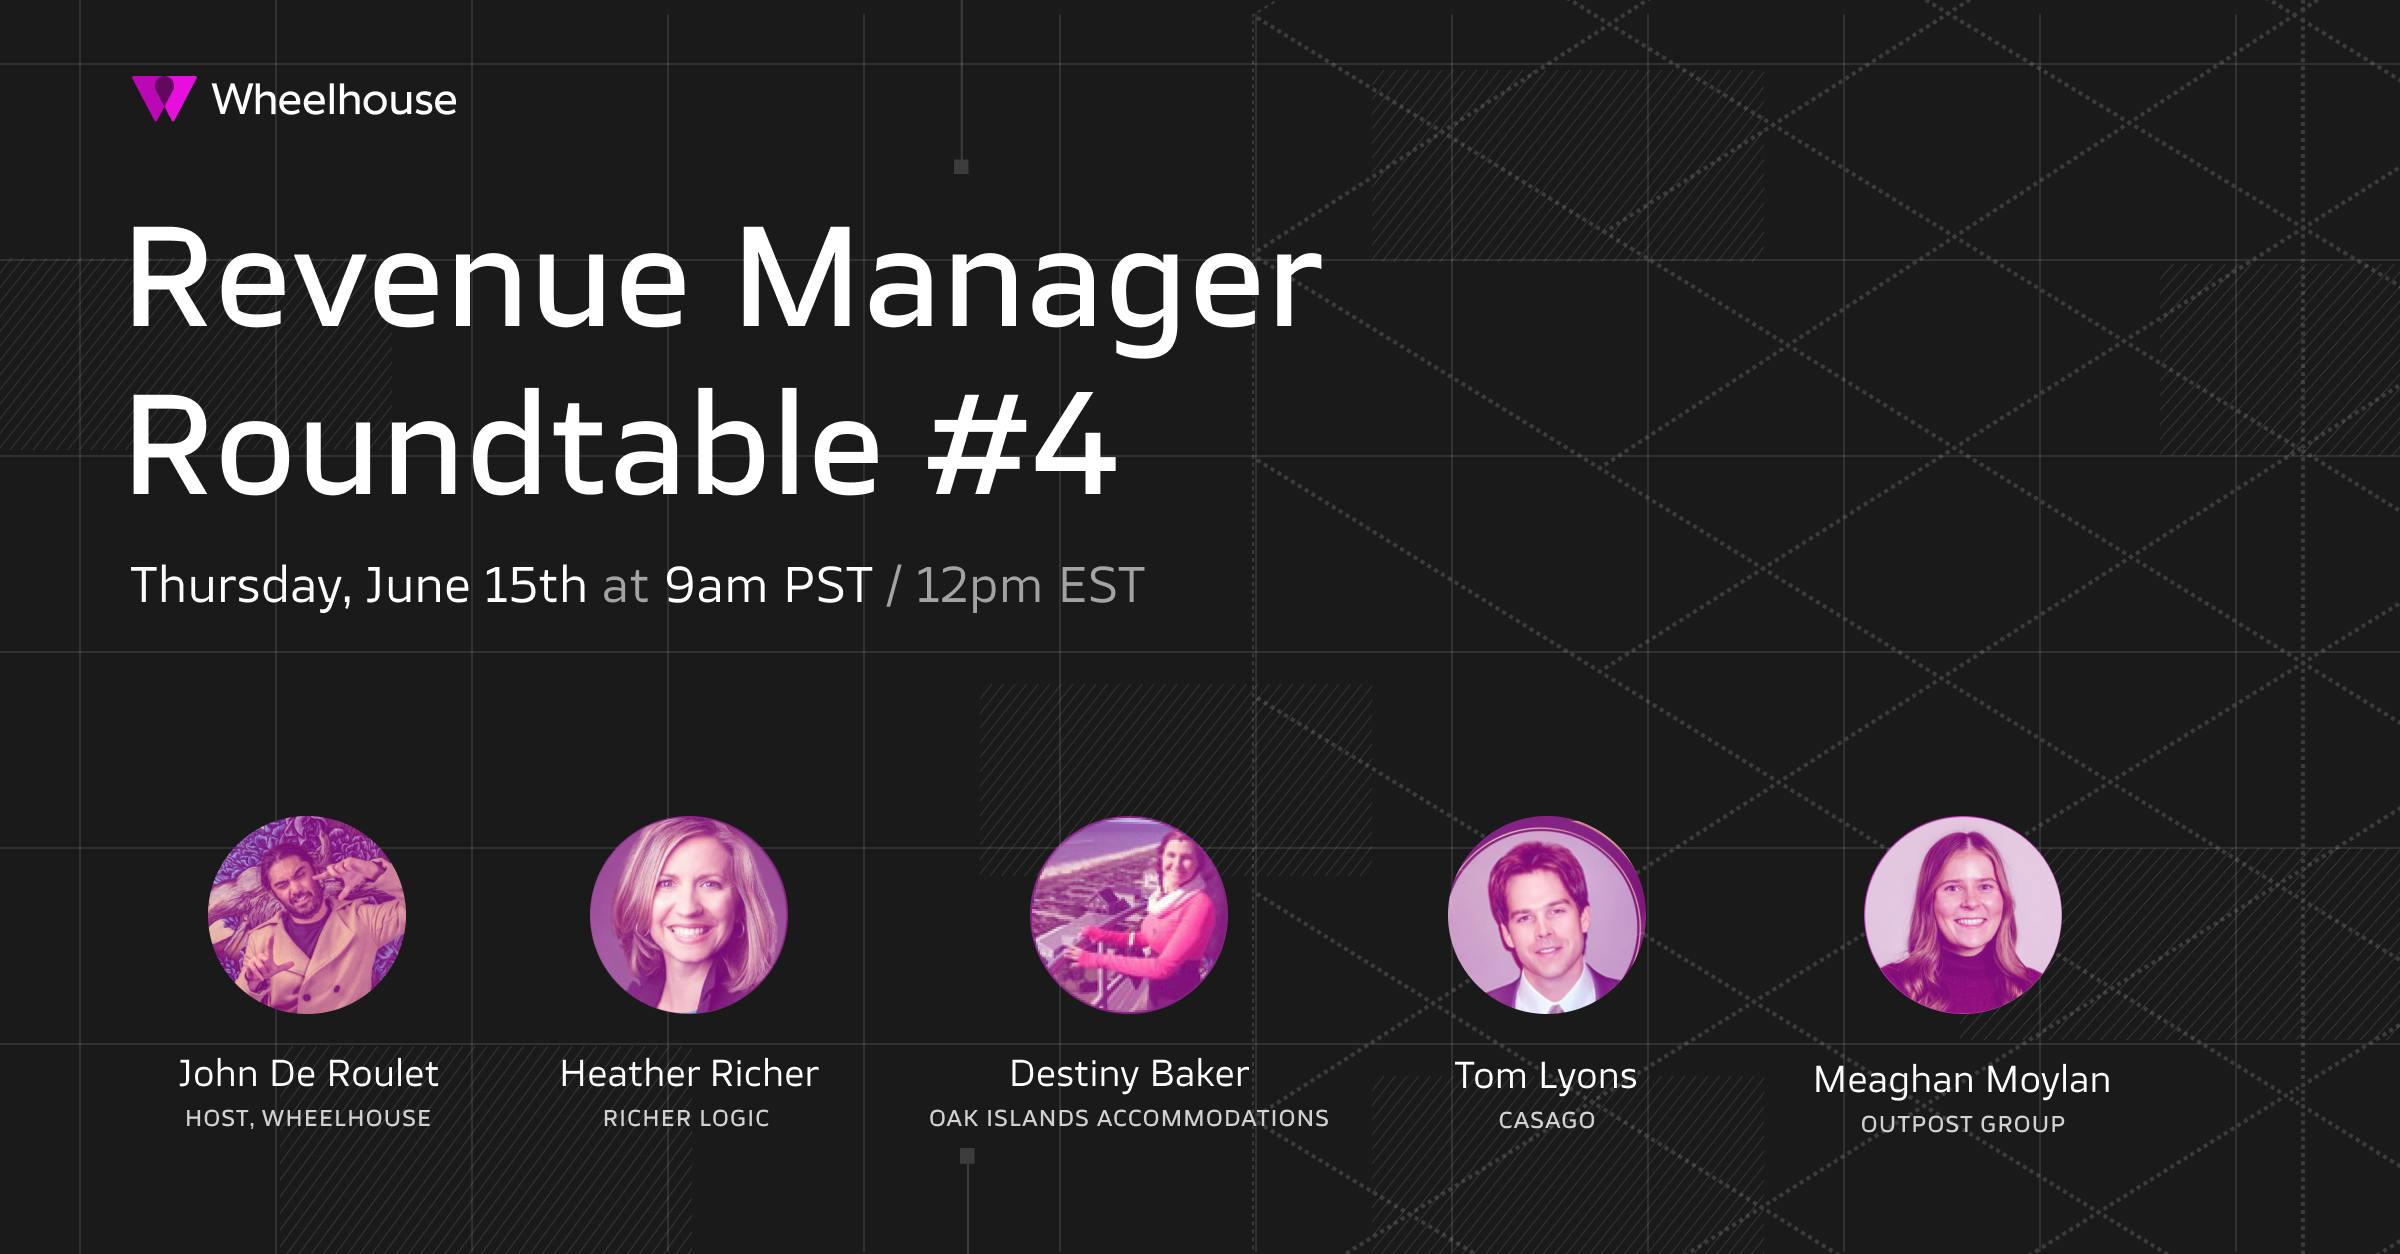 Revenue Manager roundtable #4 profile